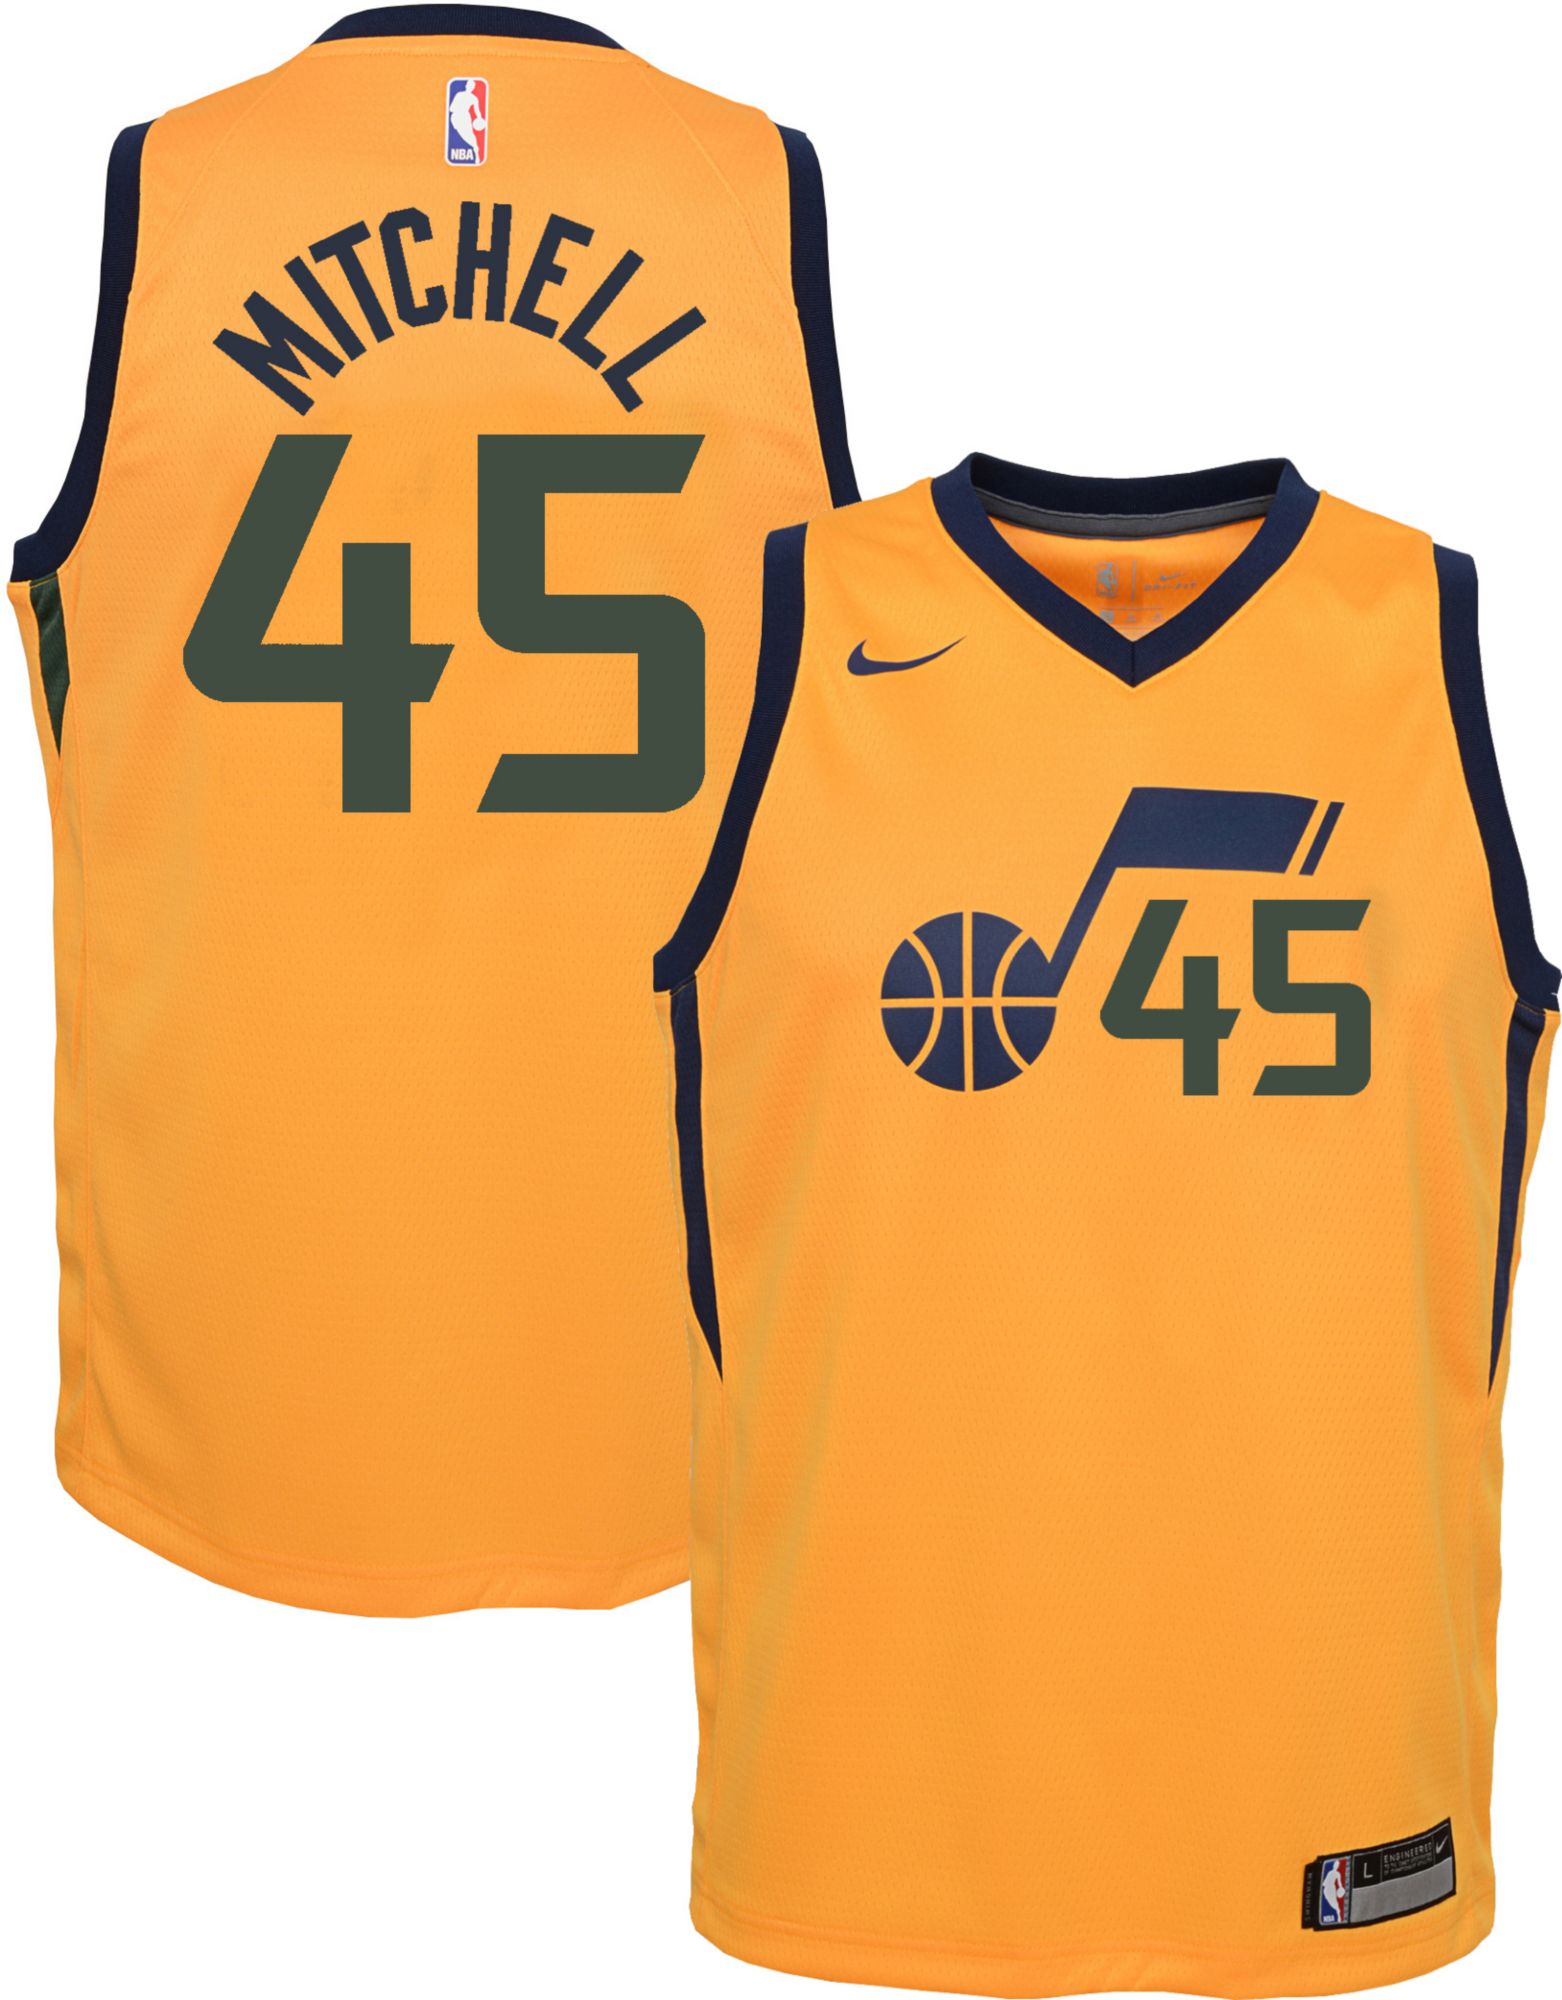 donovan mitchell jersey youth